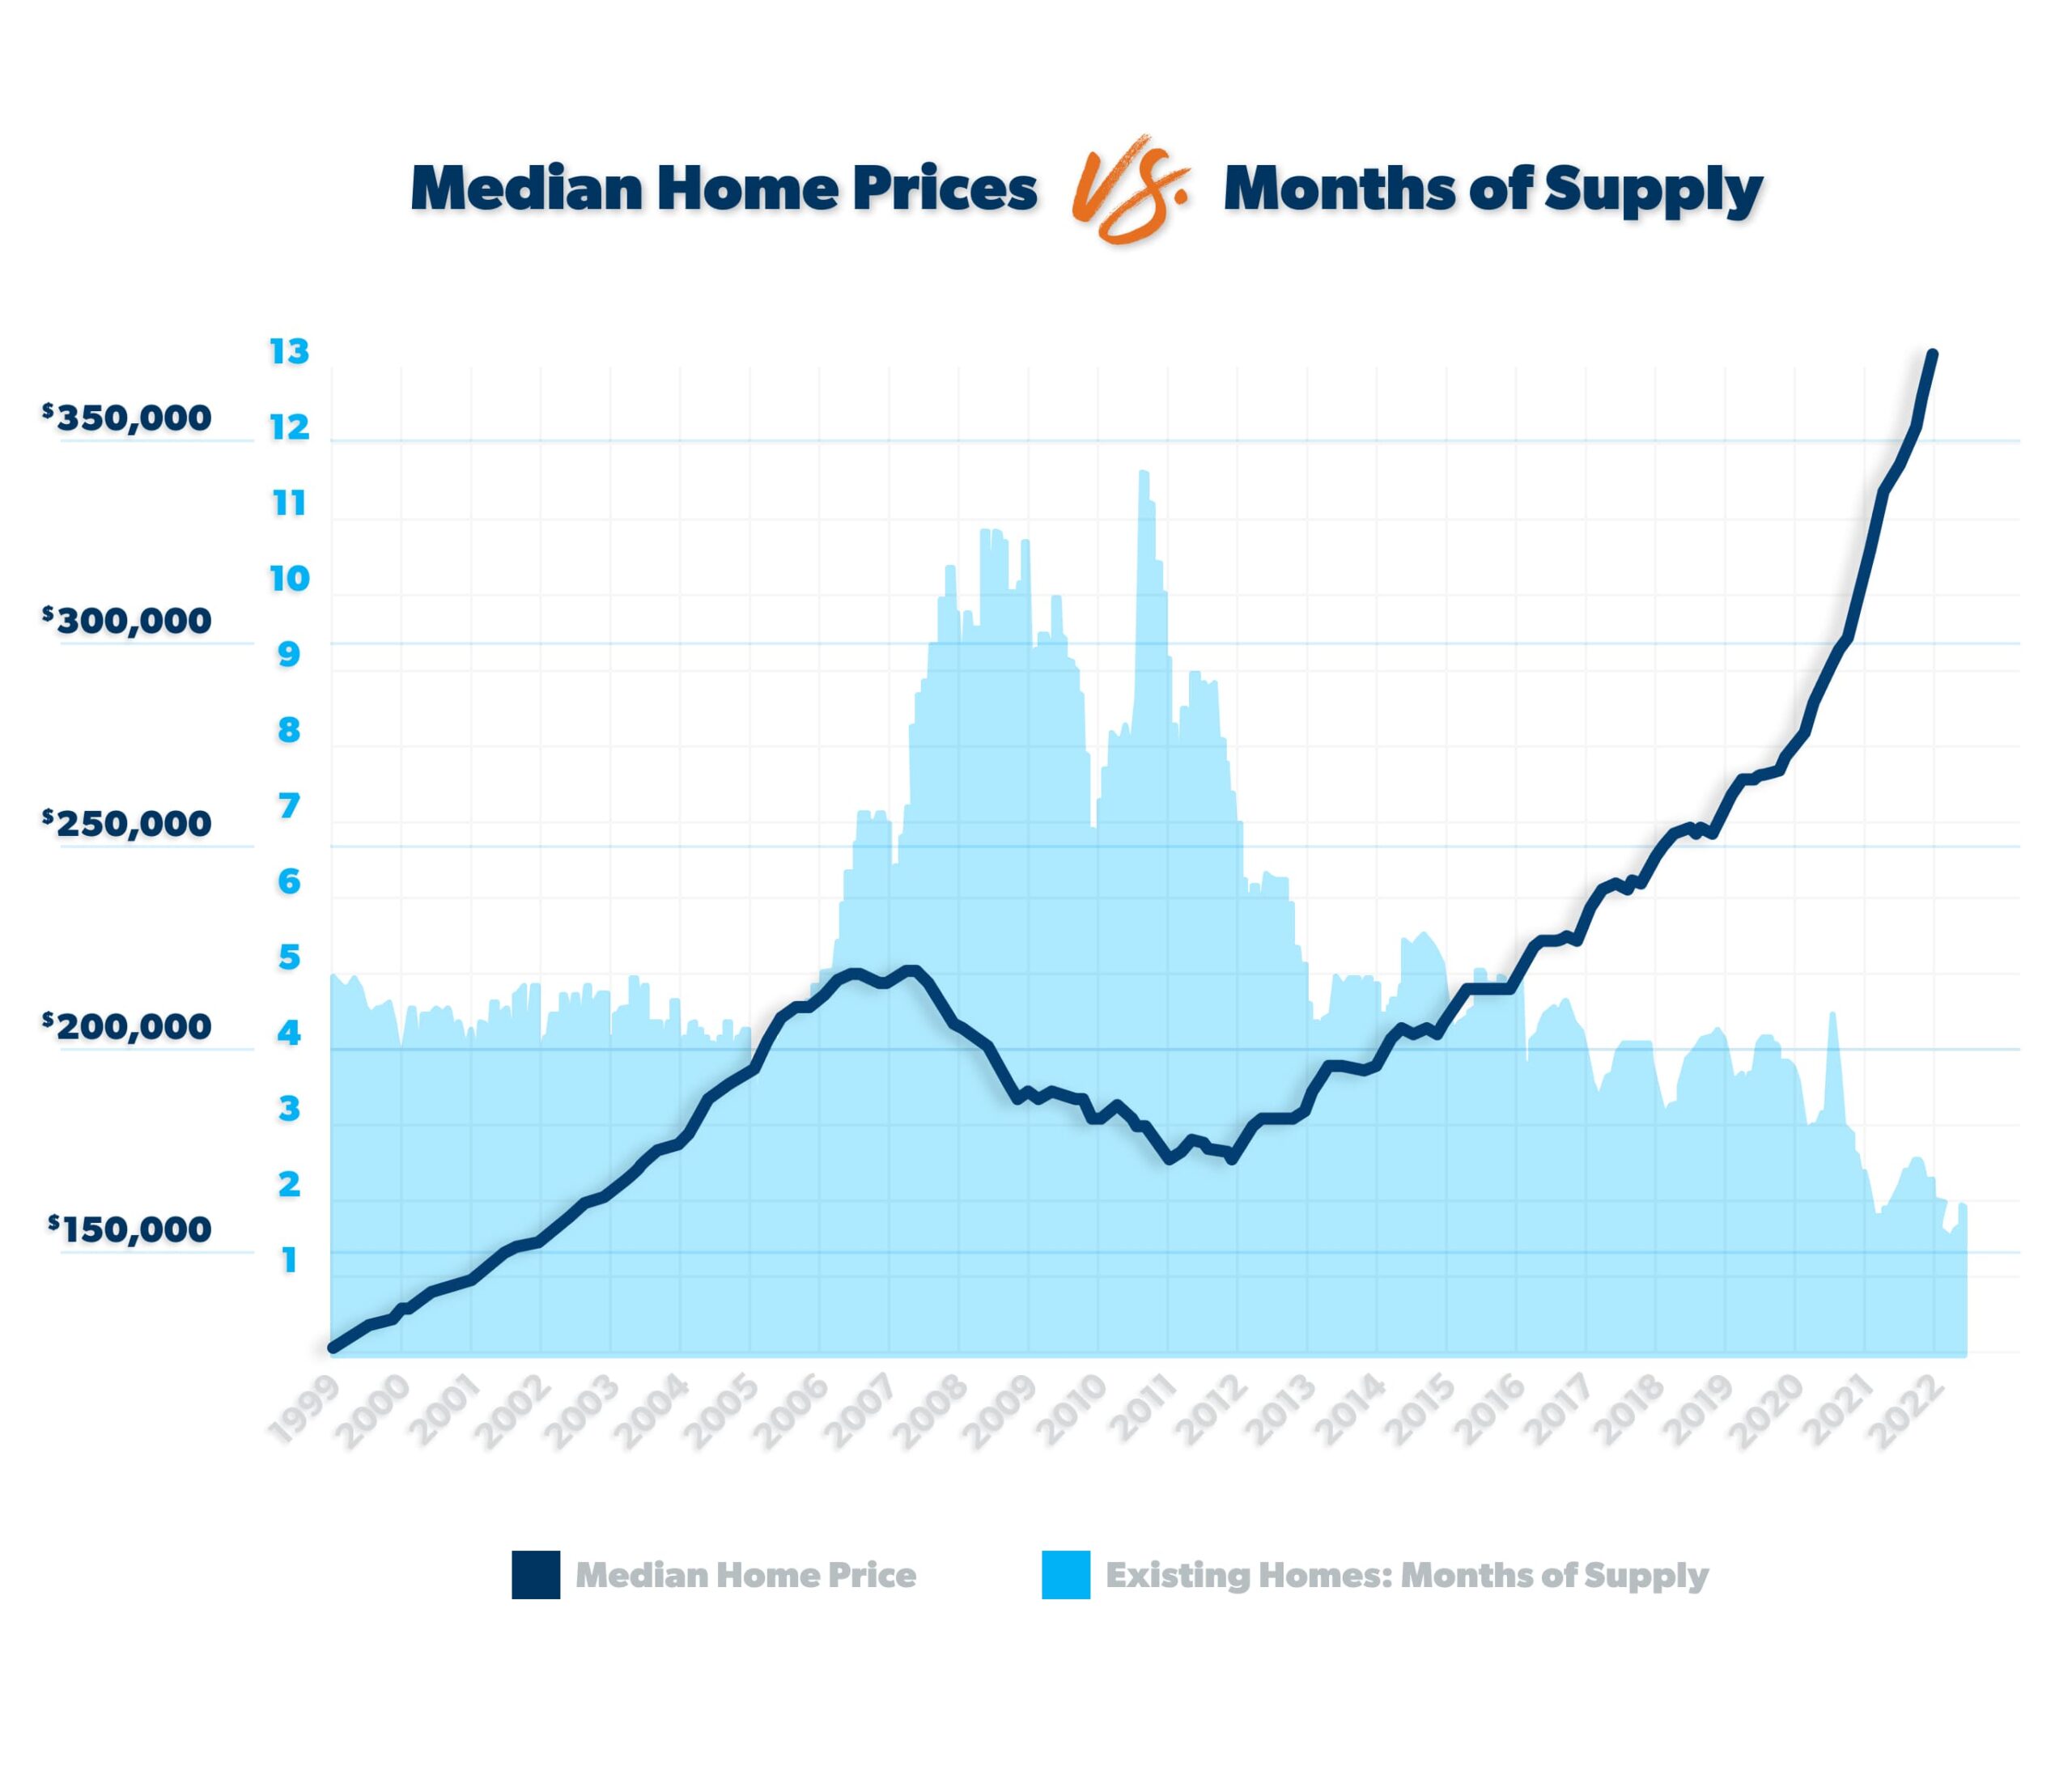 housing market's median home prices and months of supply